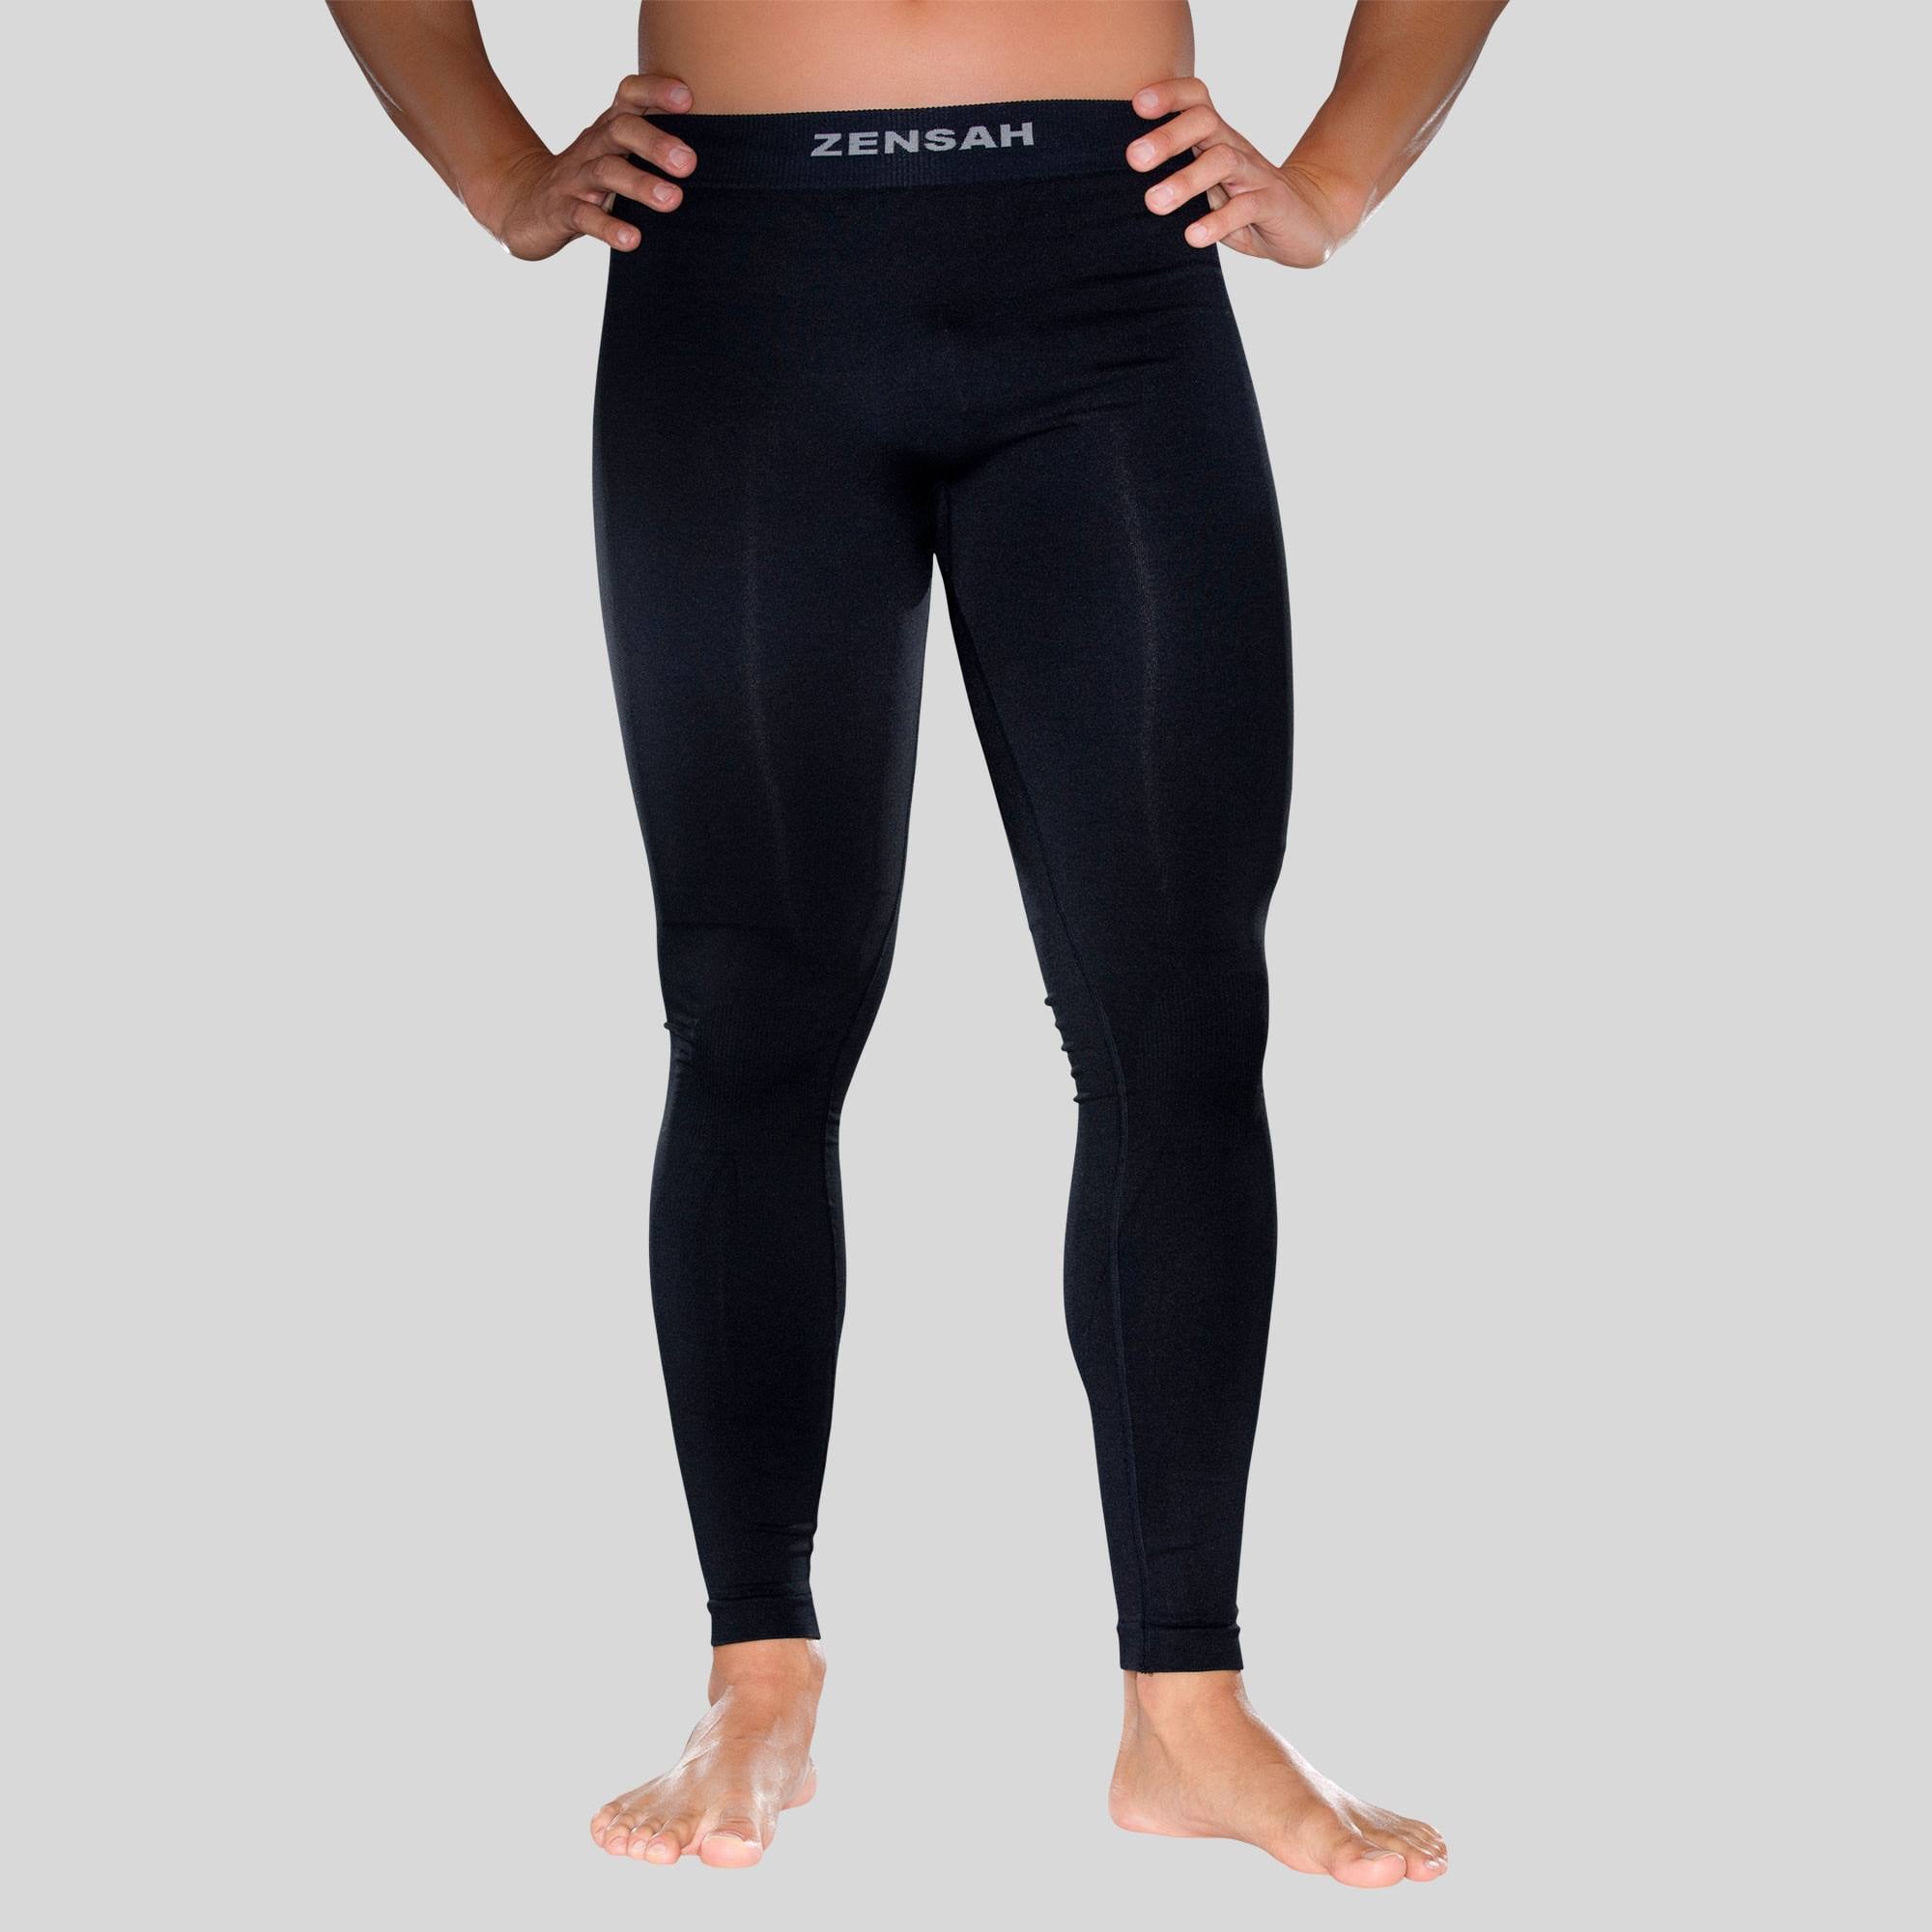 REI Co-op Midweight Base Layer Tights - Women's Petite Sizes